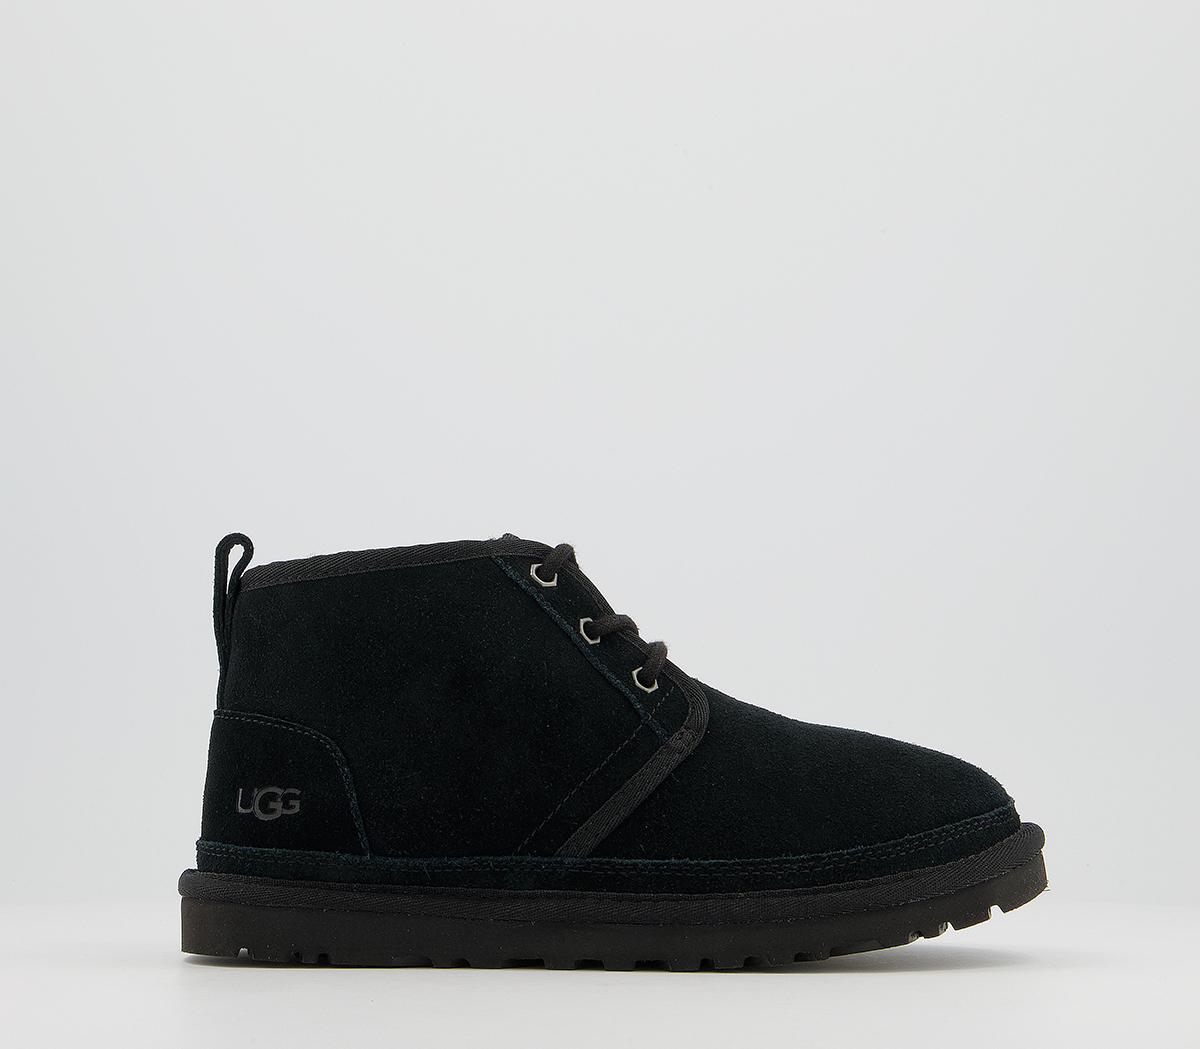 UGG Neumel Boots Black - Womens Boots